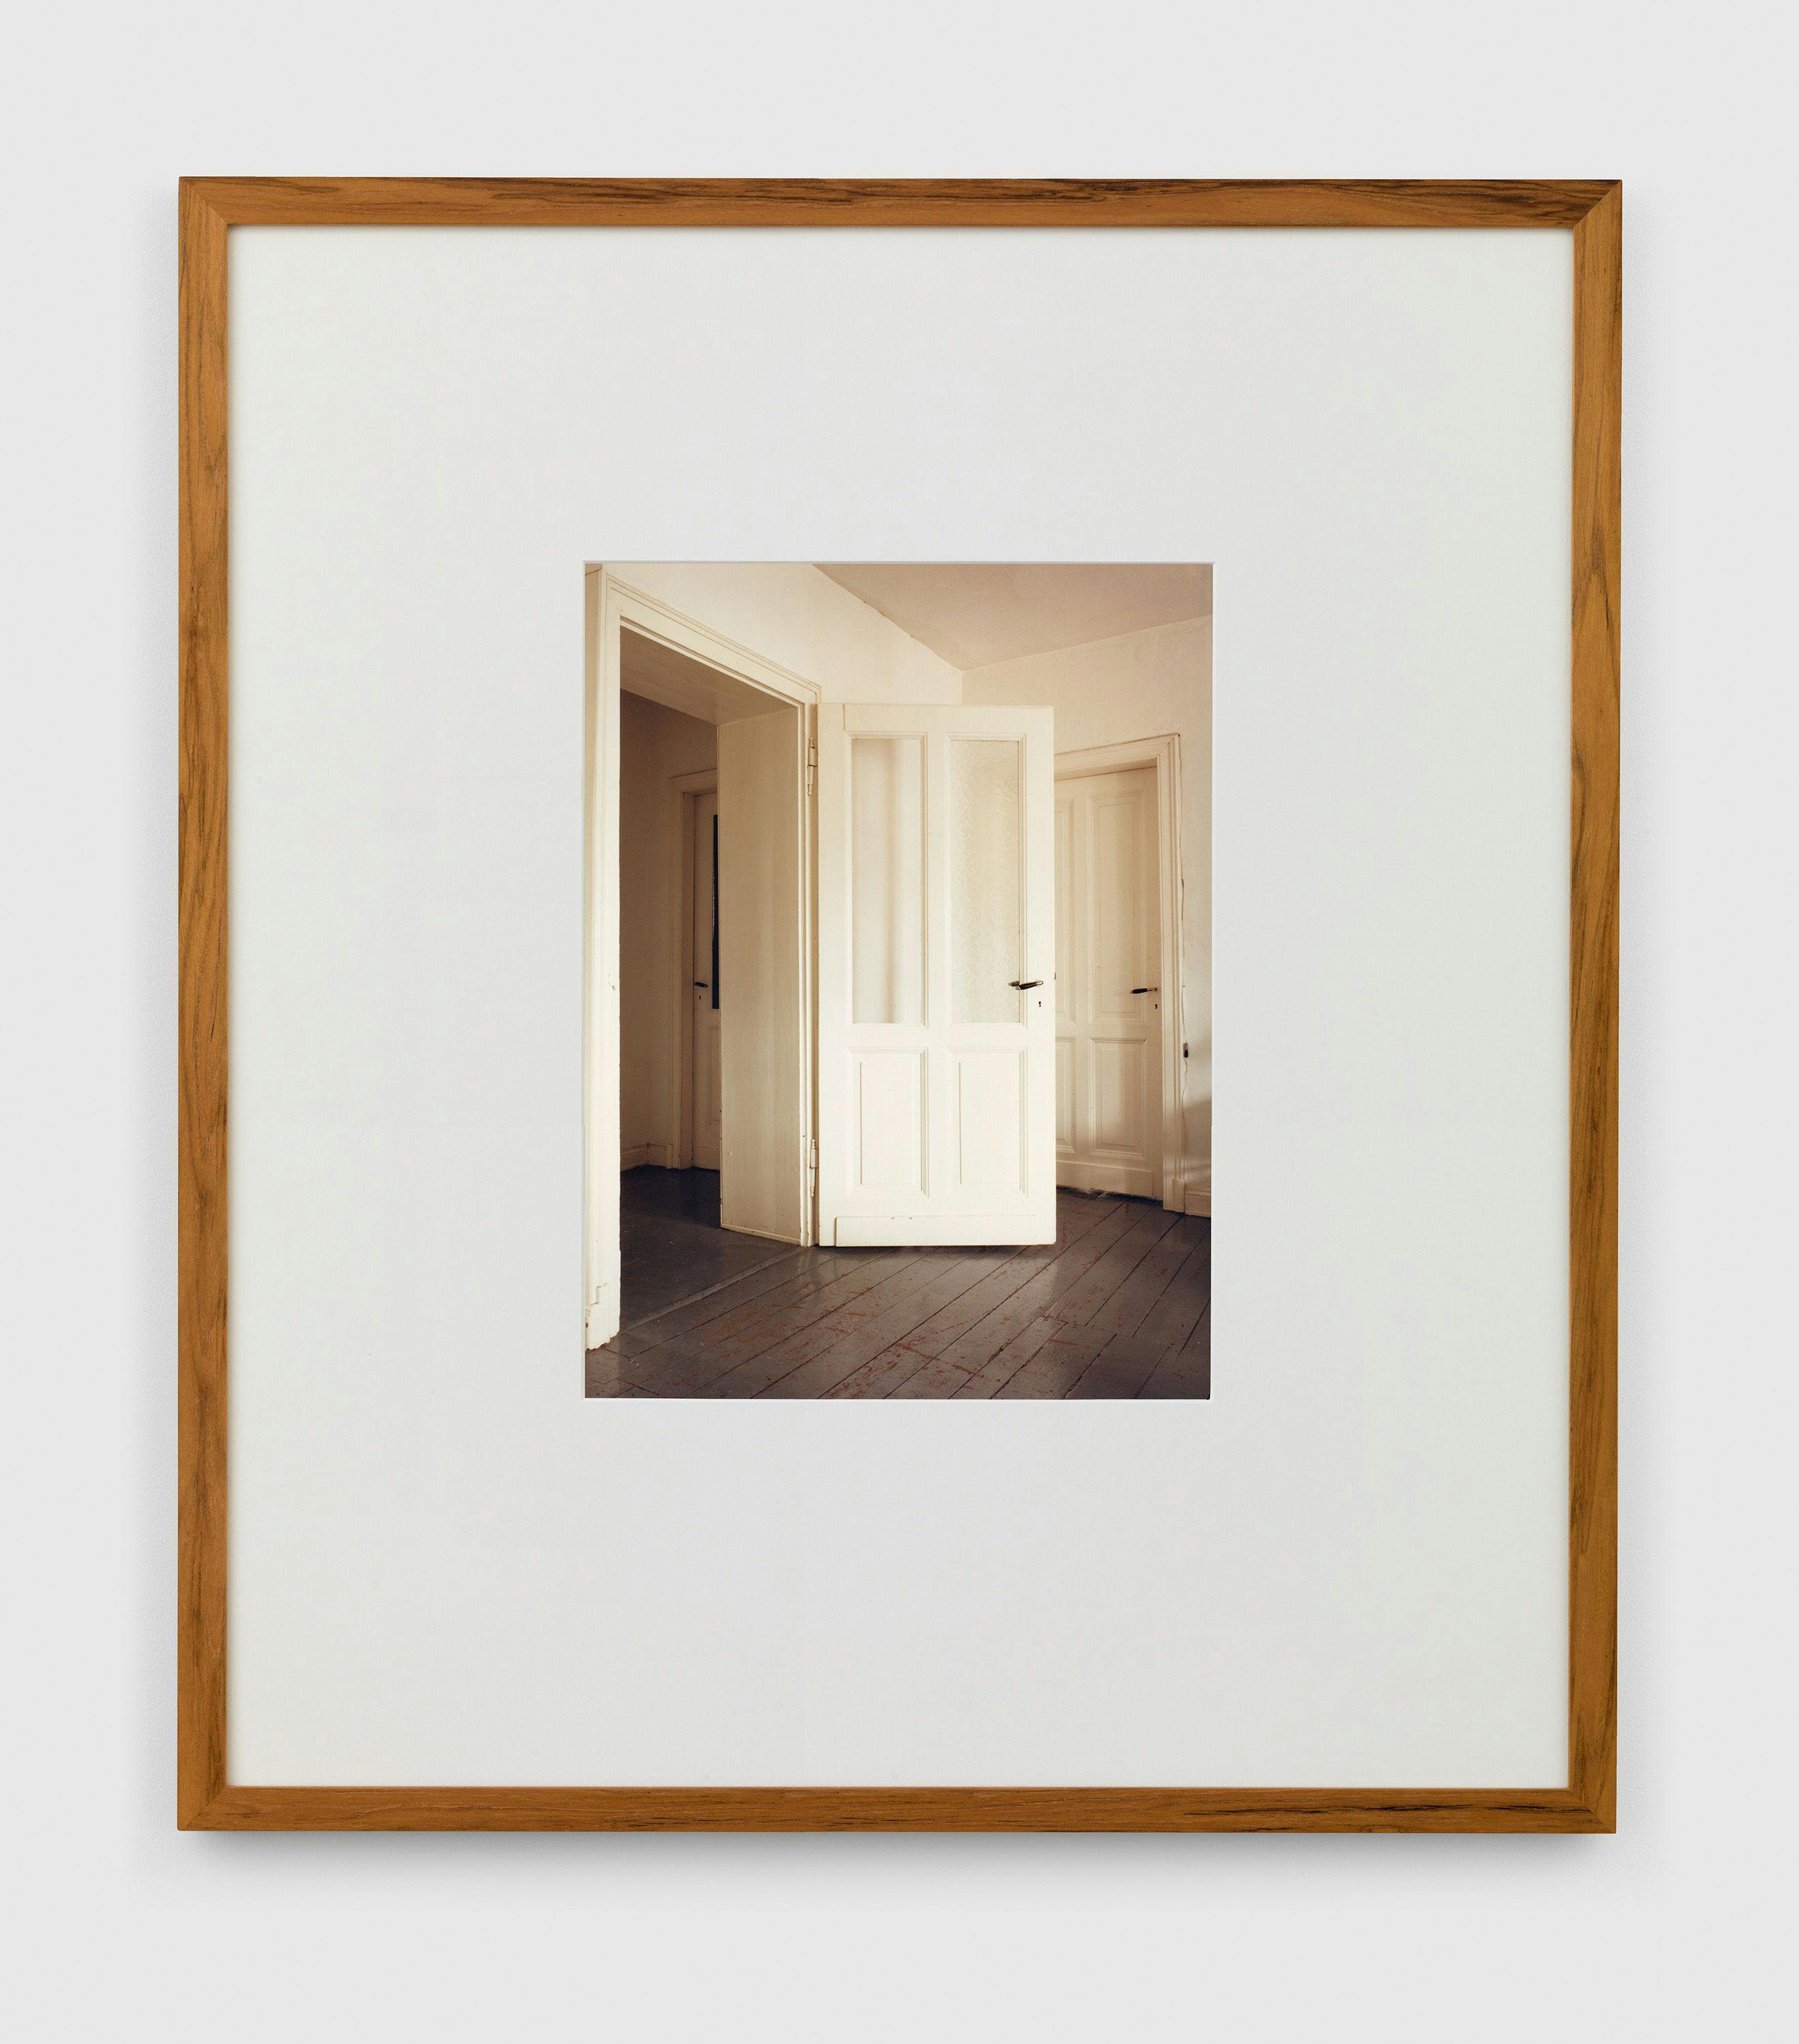 A chromogenic print by Thomas Ruff, titled Interieur 8C, dated 1980.